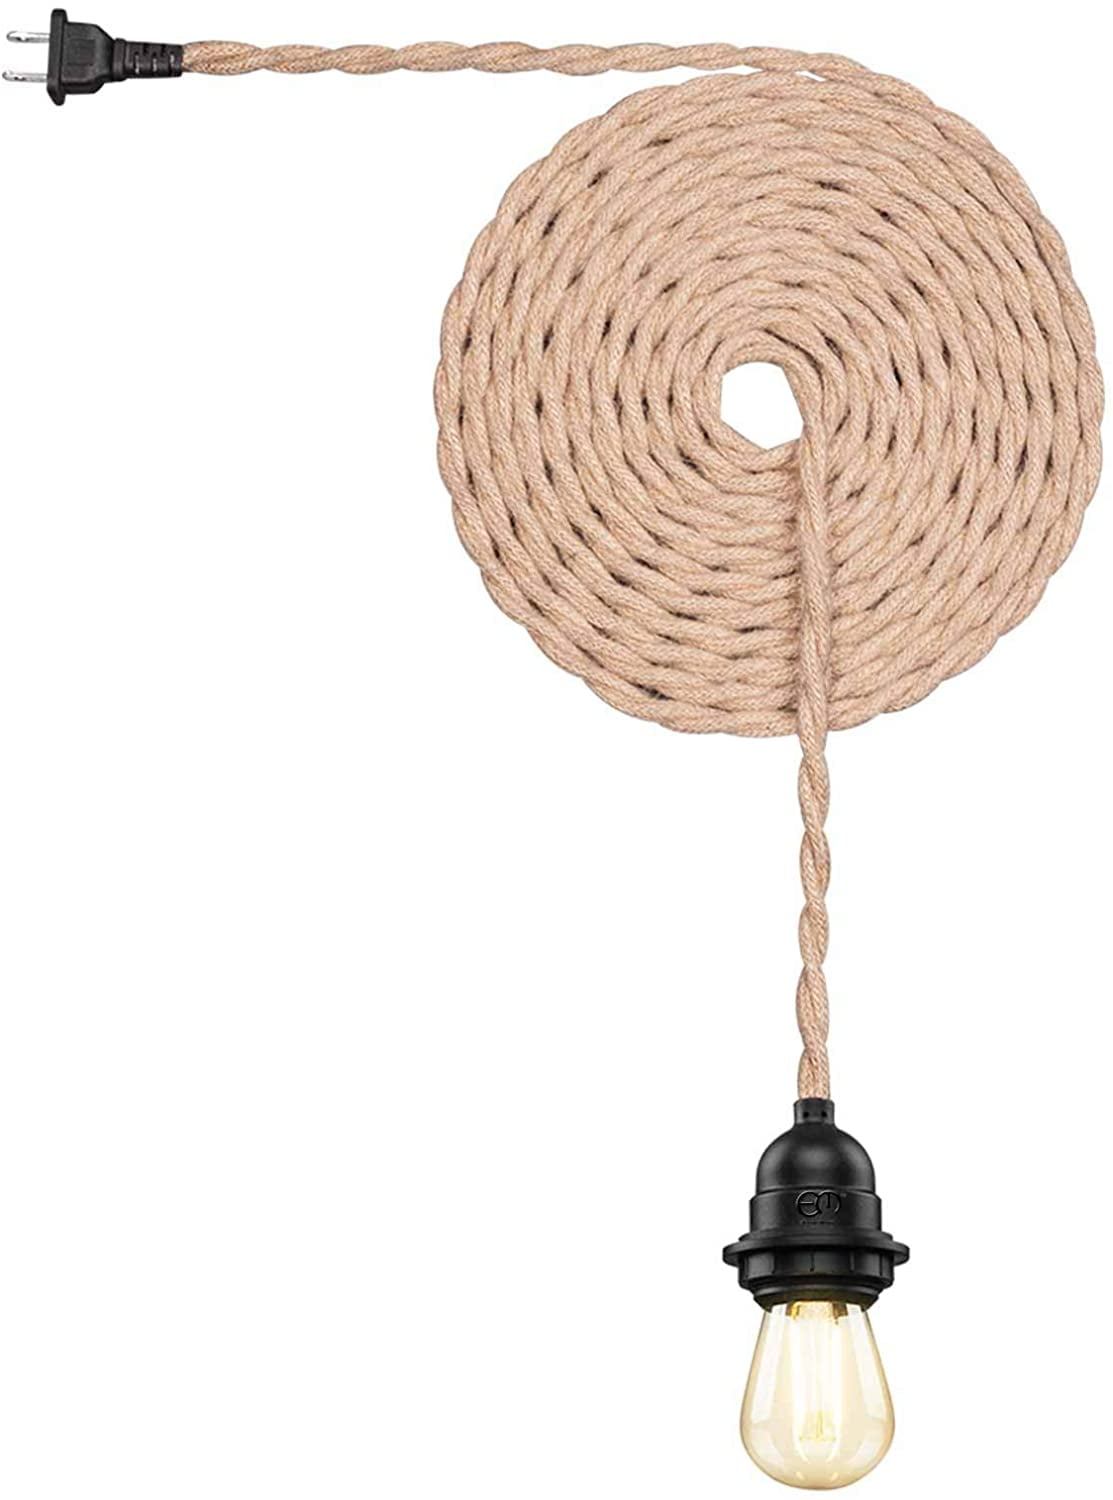 E26 Outdoor Ceiling Lighting Cord